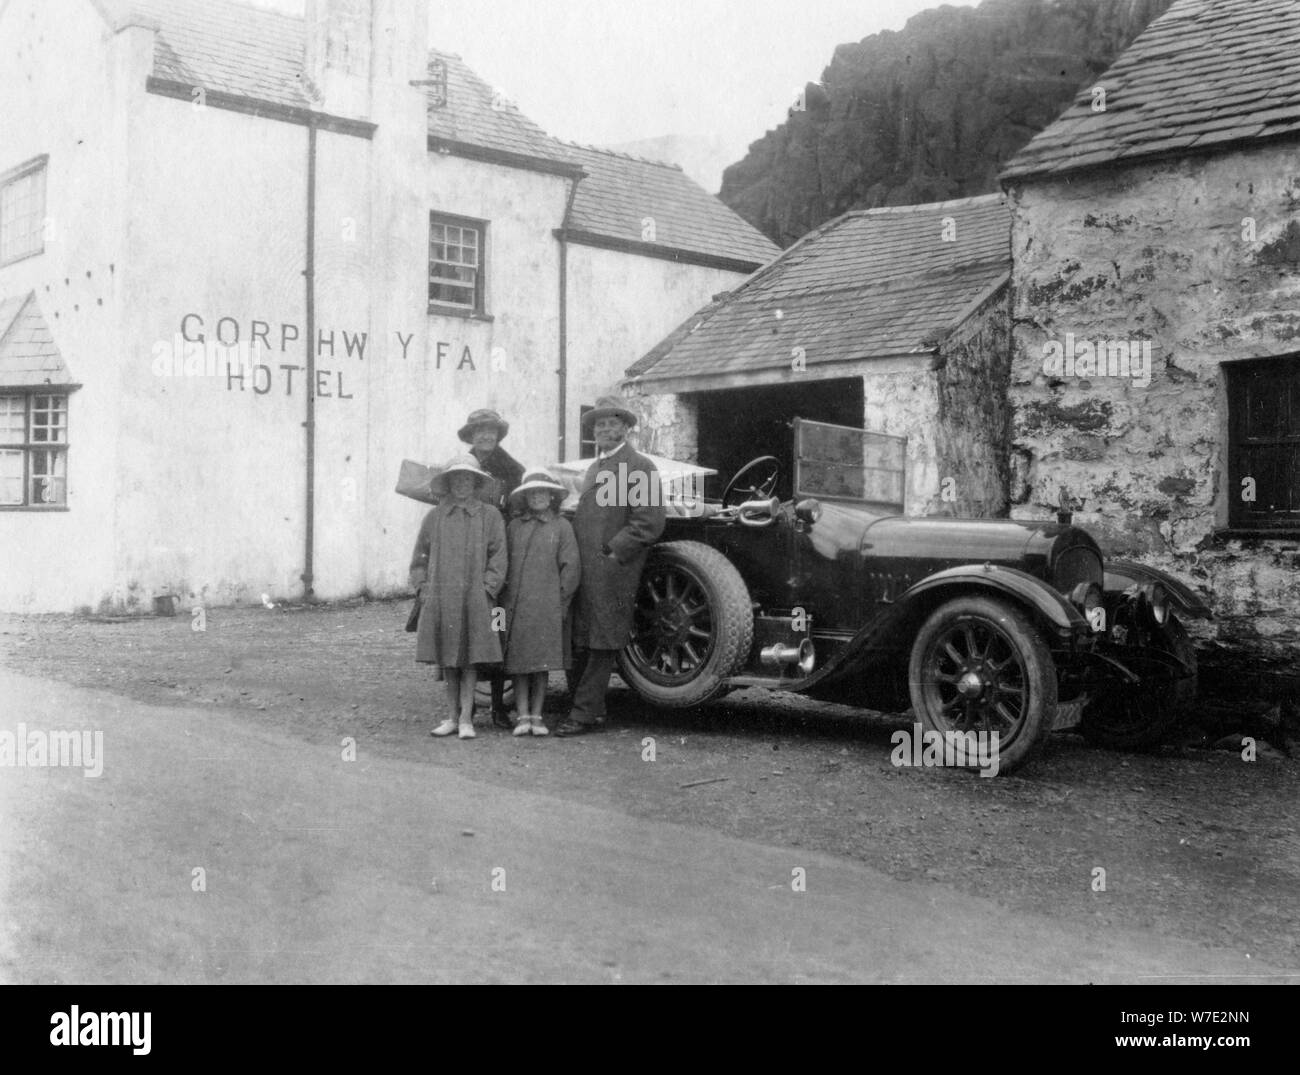 A family standing beside their car, Gorphwysfa Hotel, North Wales, c1920s-c1930s(?). Artist: Unknown Stock Photo